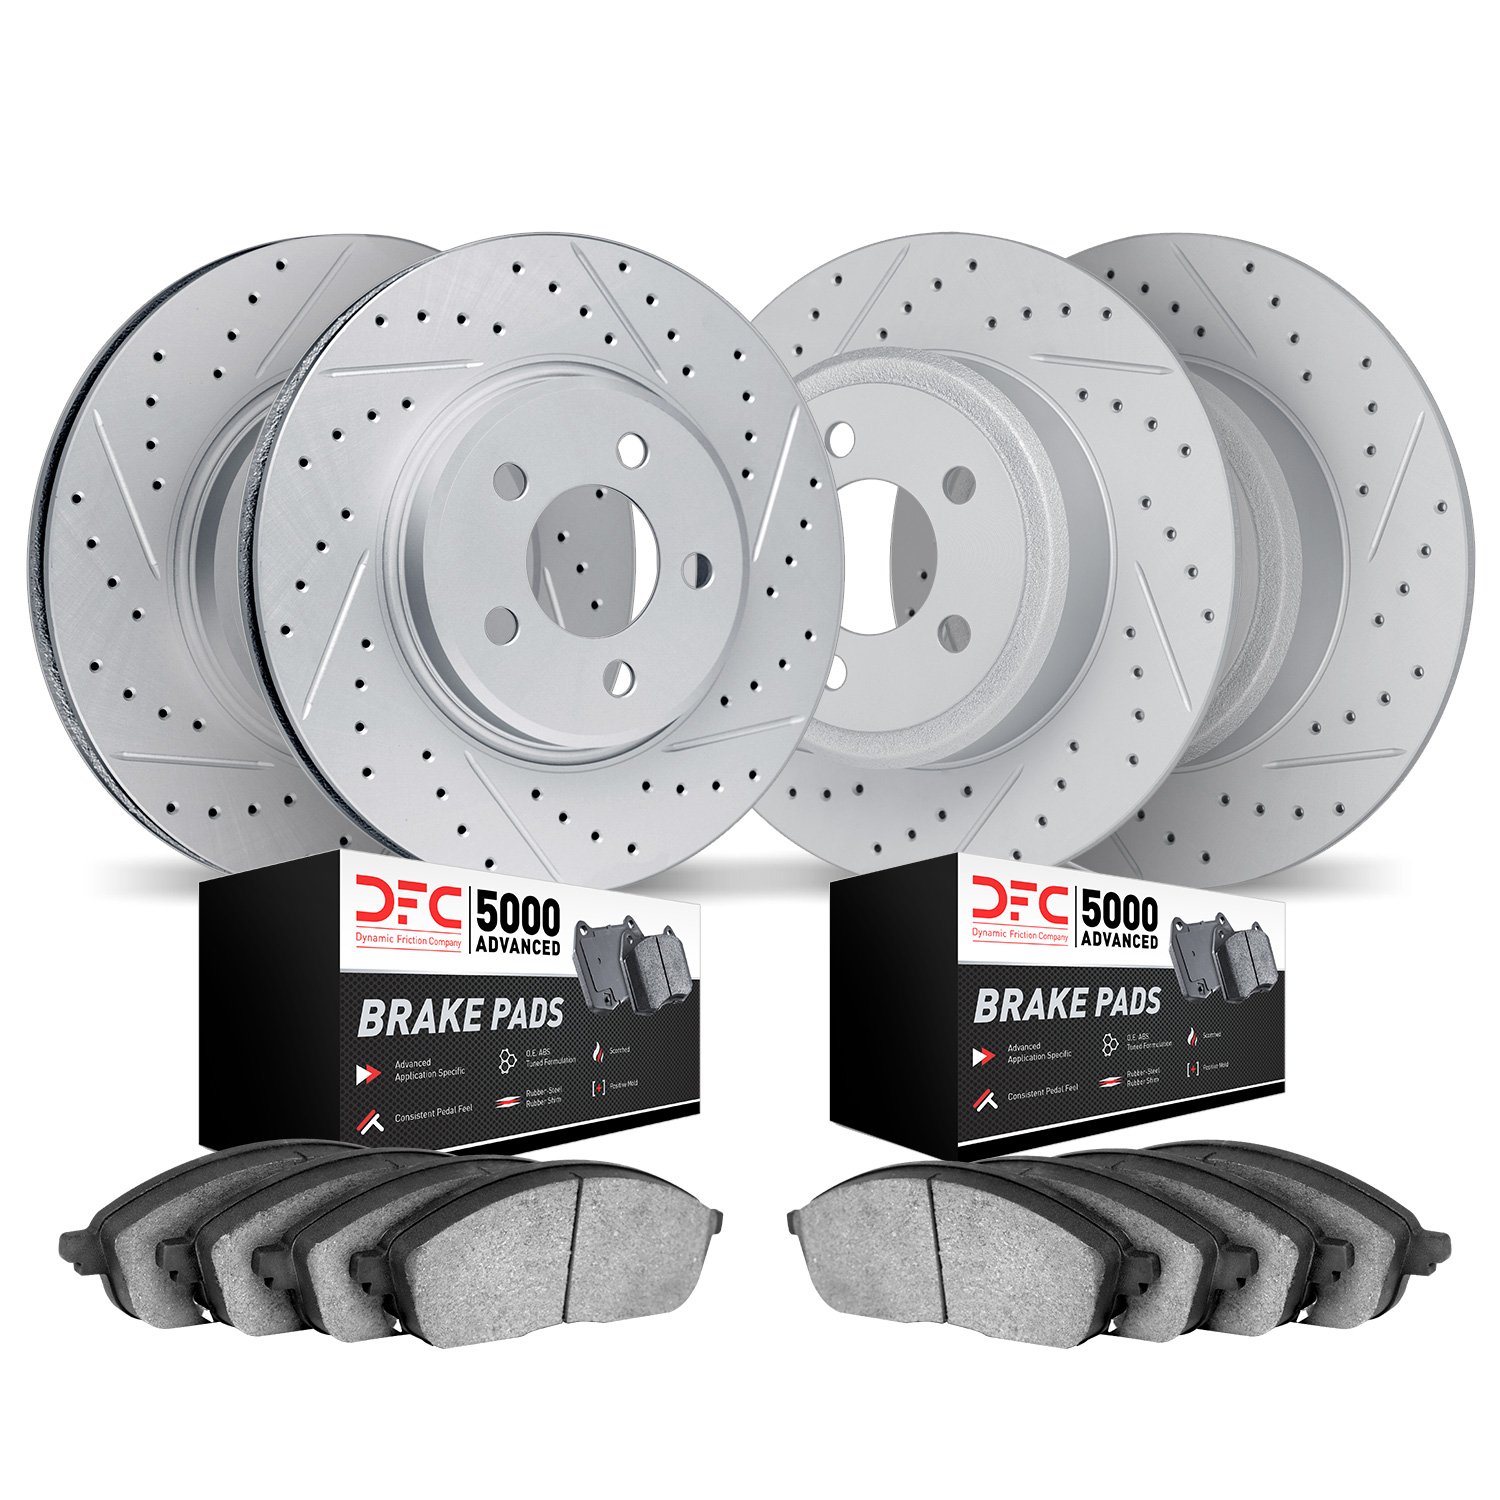 2504-45020 Geoperformance Drilled/Slotted Rotors w/5000 Advanced Brake Pads Kit, 2011-2016 GM, Position: Front and Rear